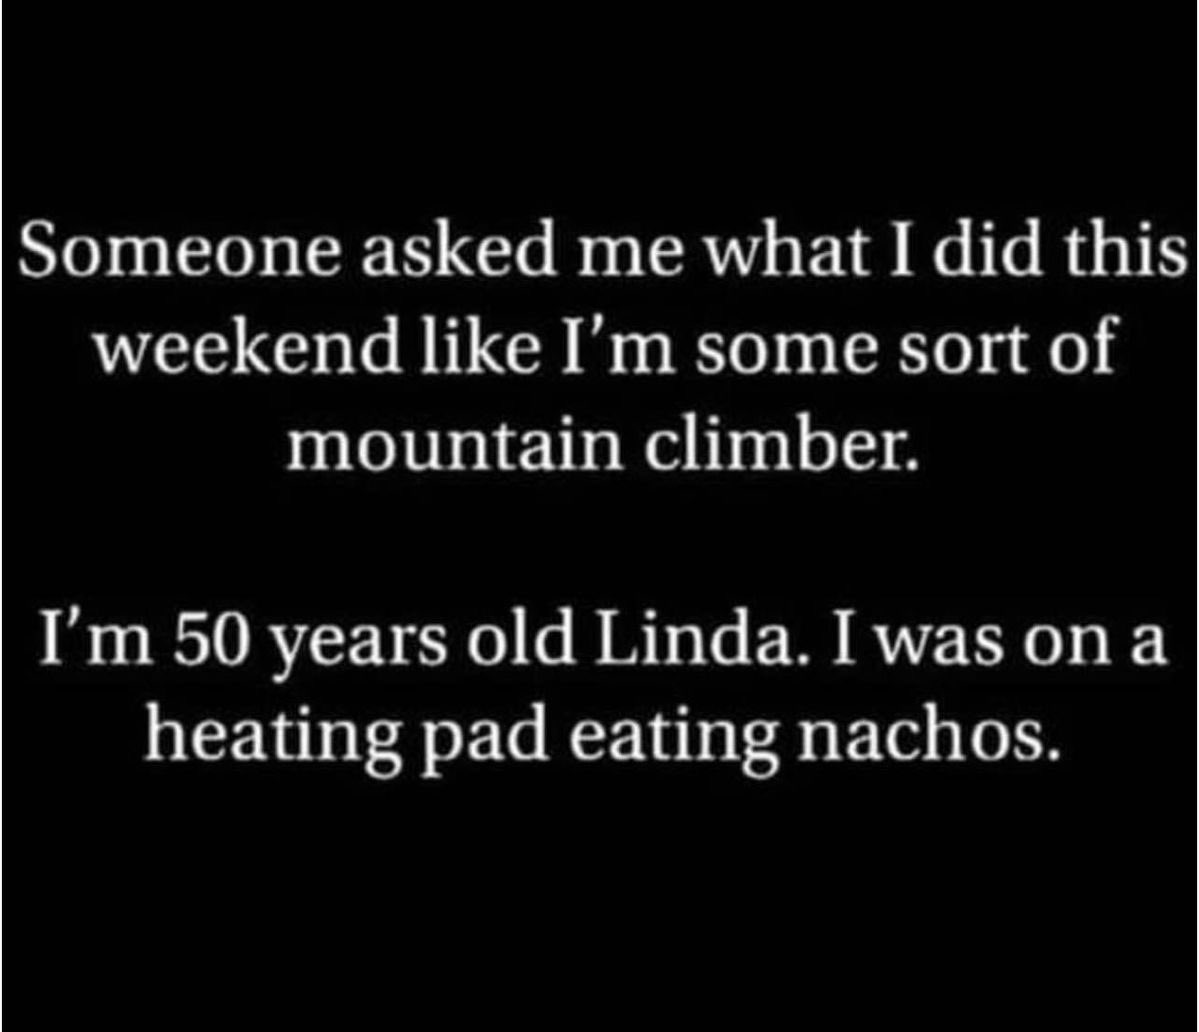 🤣🤣 not really but super funny Linda..